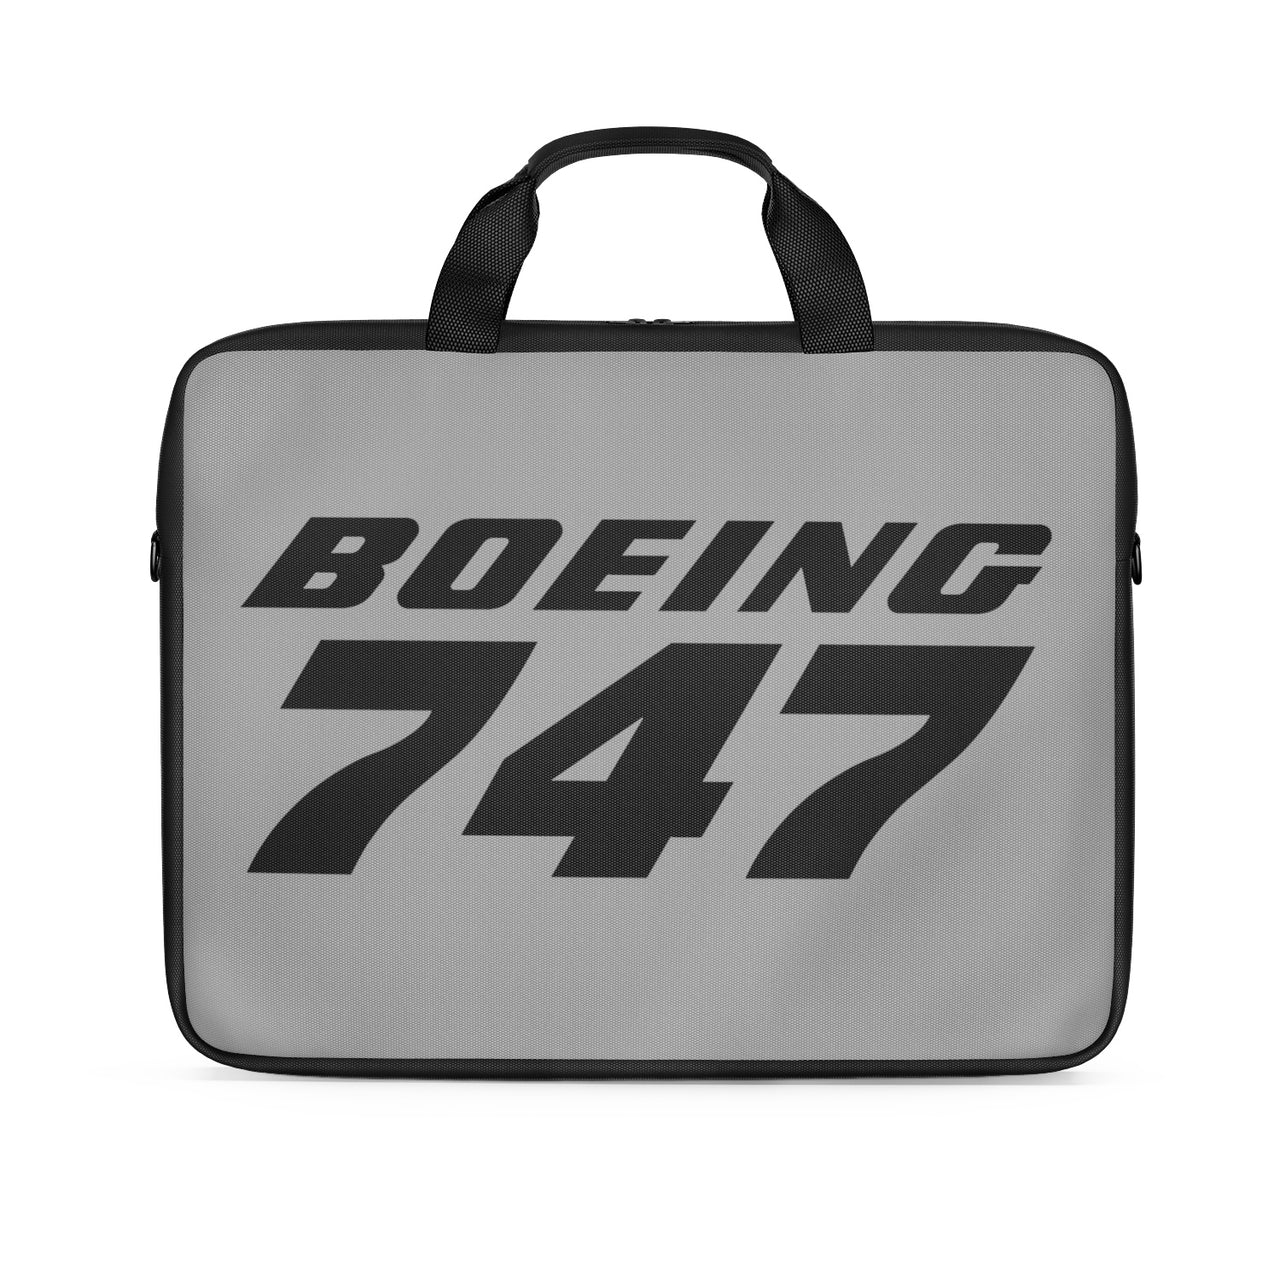 Boeing 747 & Text Designed Laptop & Tablet Bags